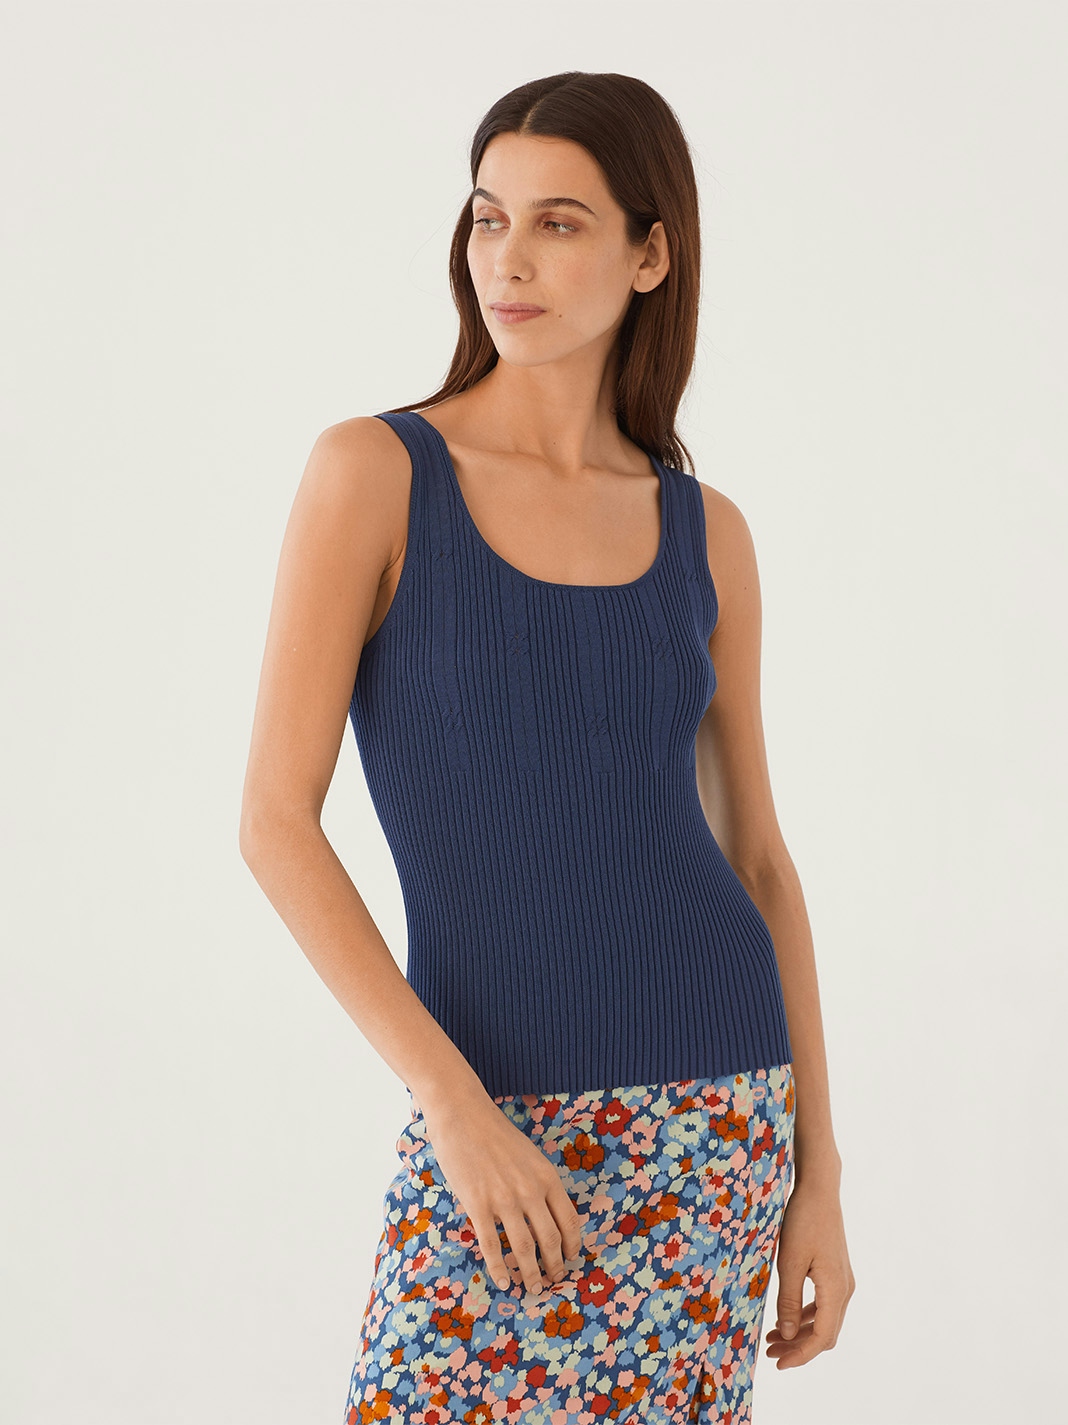 Braided ribbed top